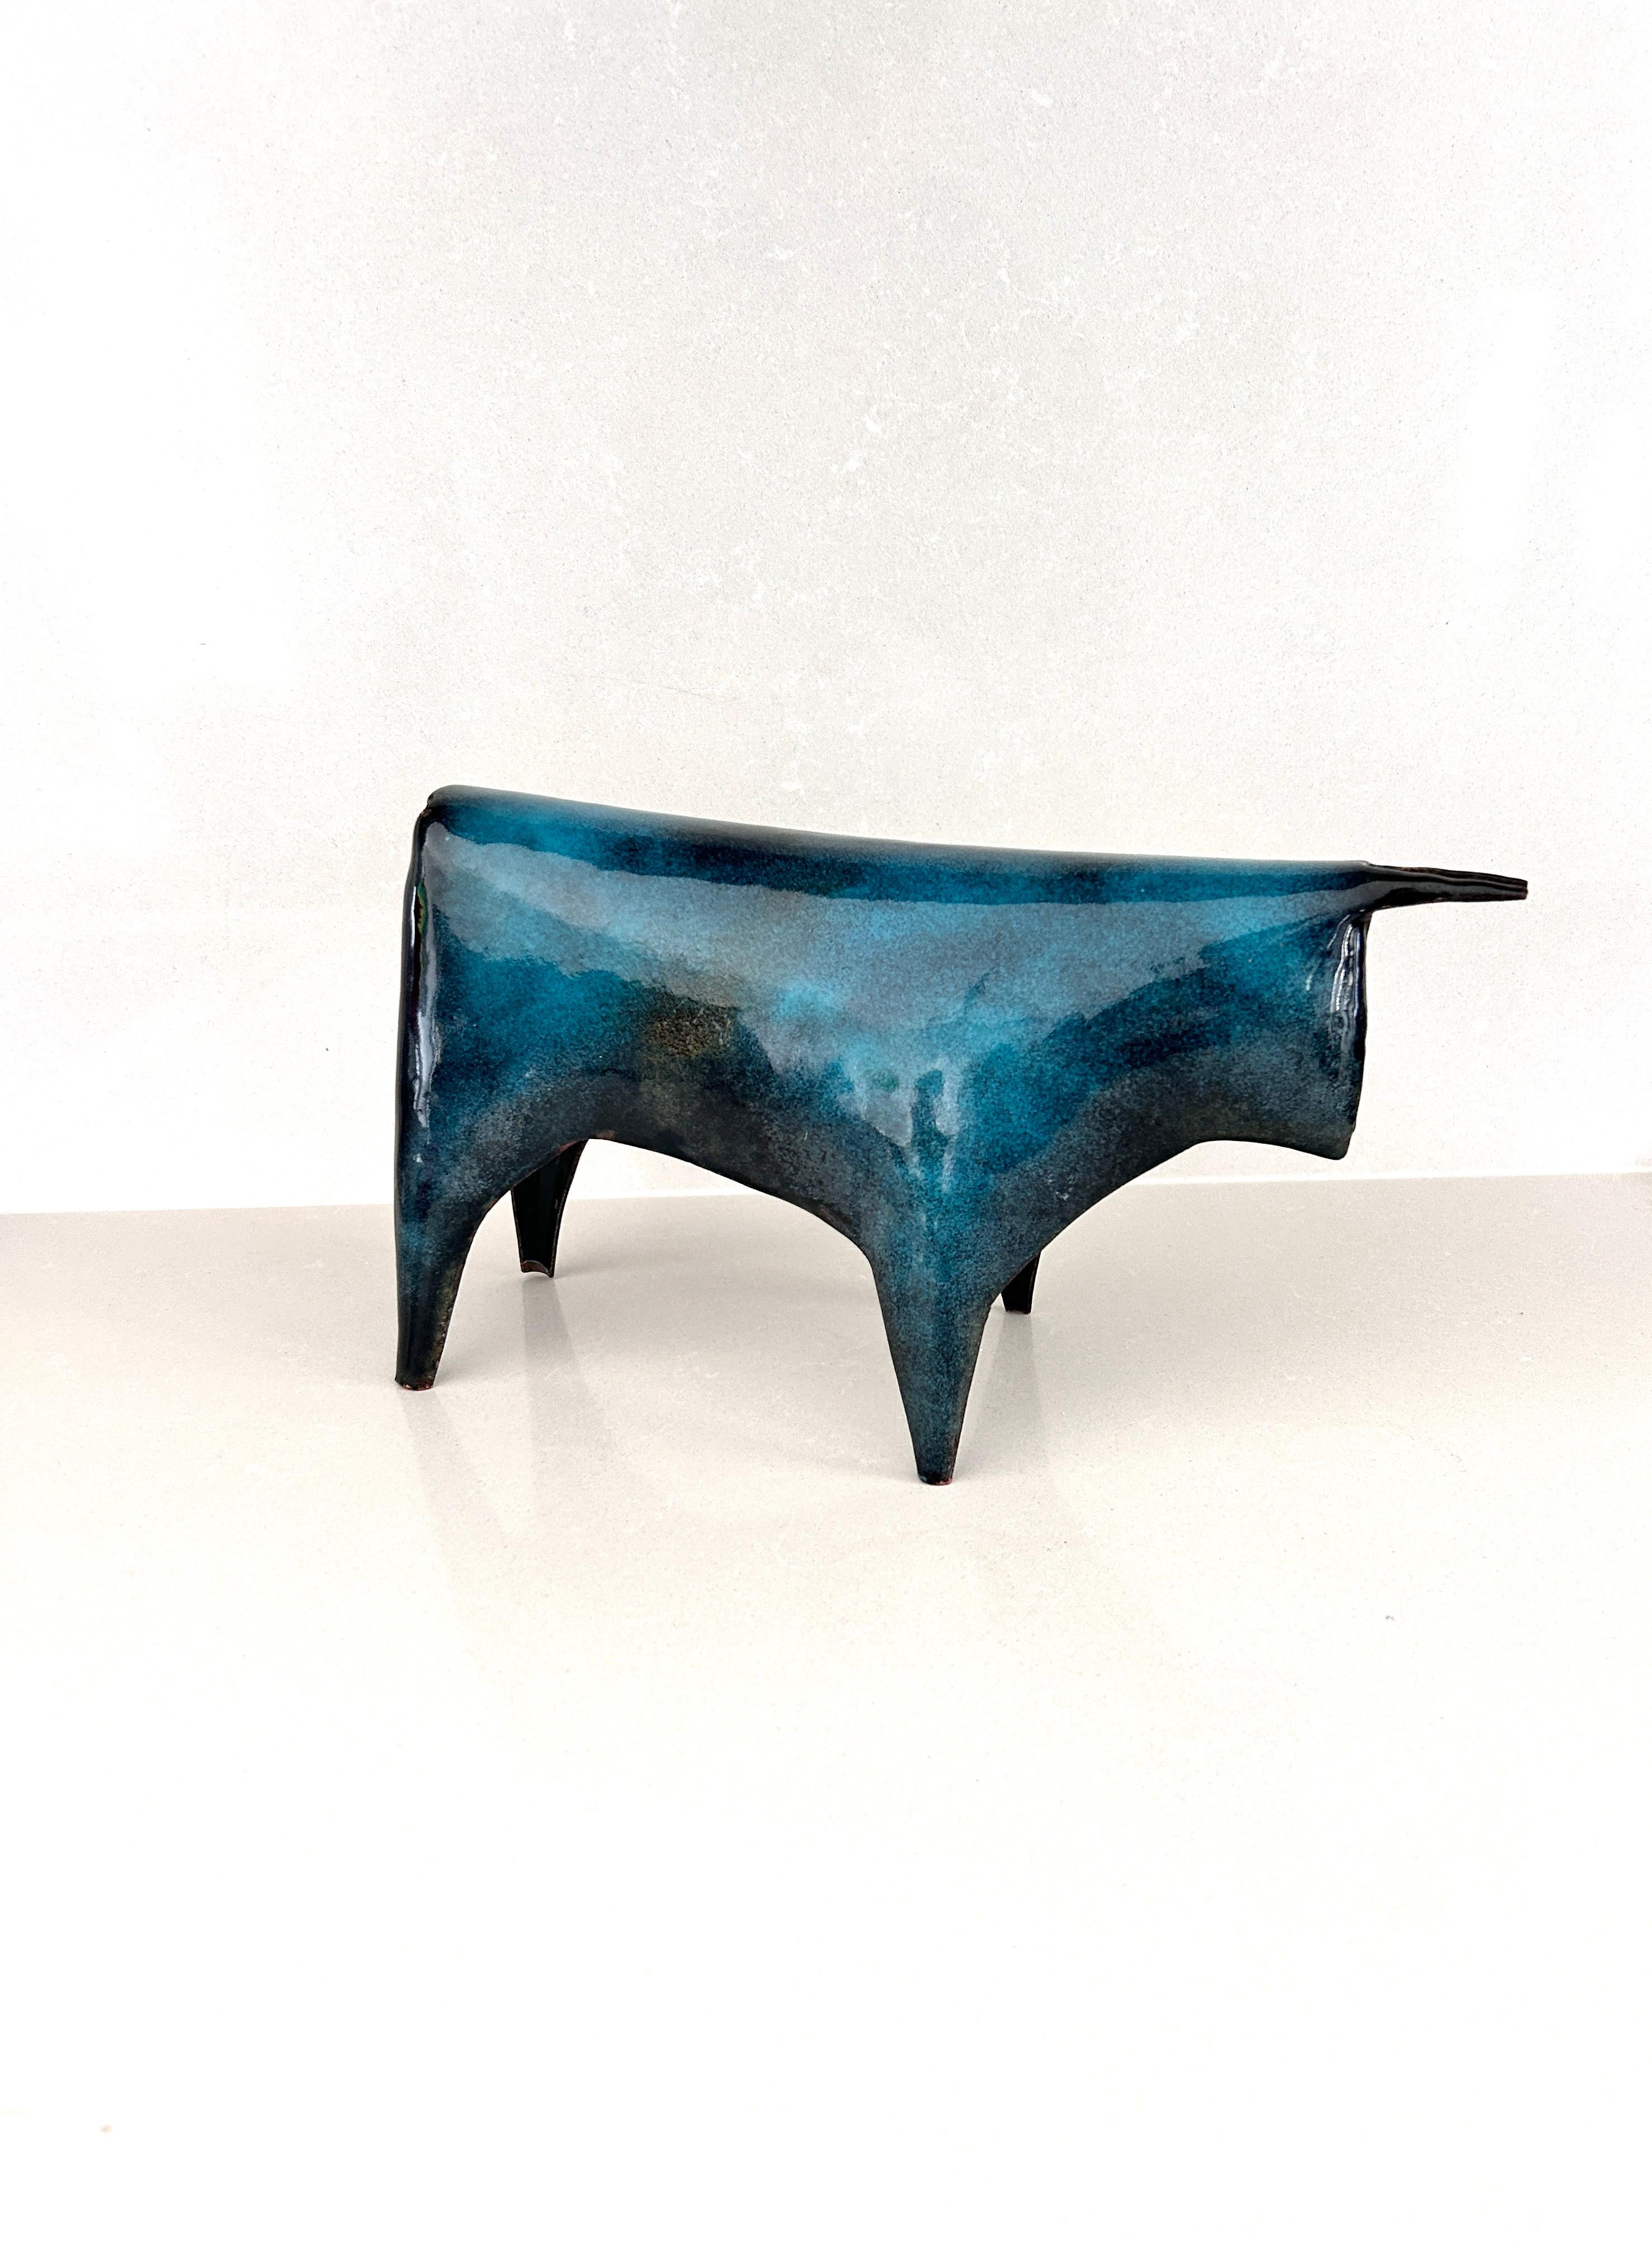 Rare and precious sculpture made by Gio Ponti for De Poli in the 1950s
The sculpture, made of copper enameled in shades of blue, depicts a bull
They are an invention, these figures of animals-cats, fish, horses-as well as watermelons and devils-cut